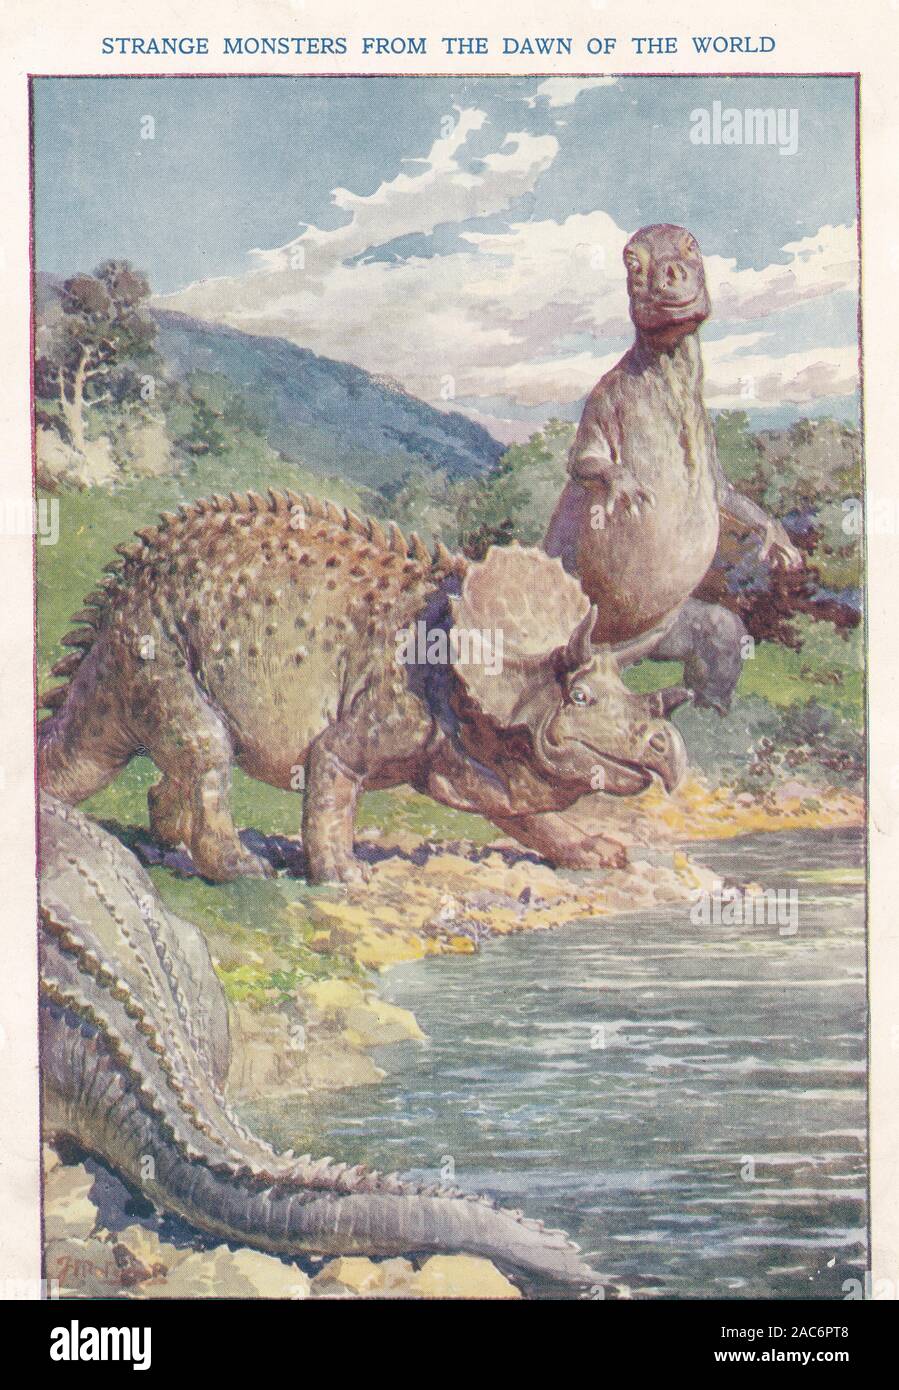 1930s Colour book plate 'Strange Monsters from the Dawn of the World' - Dinosaurs. Stock Photo